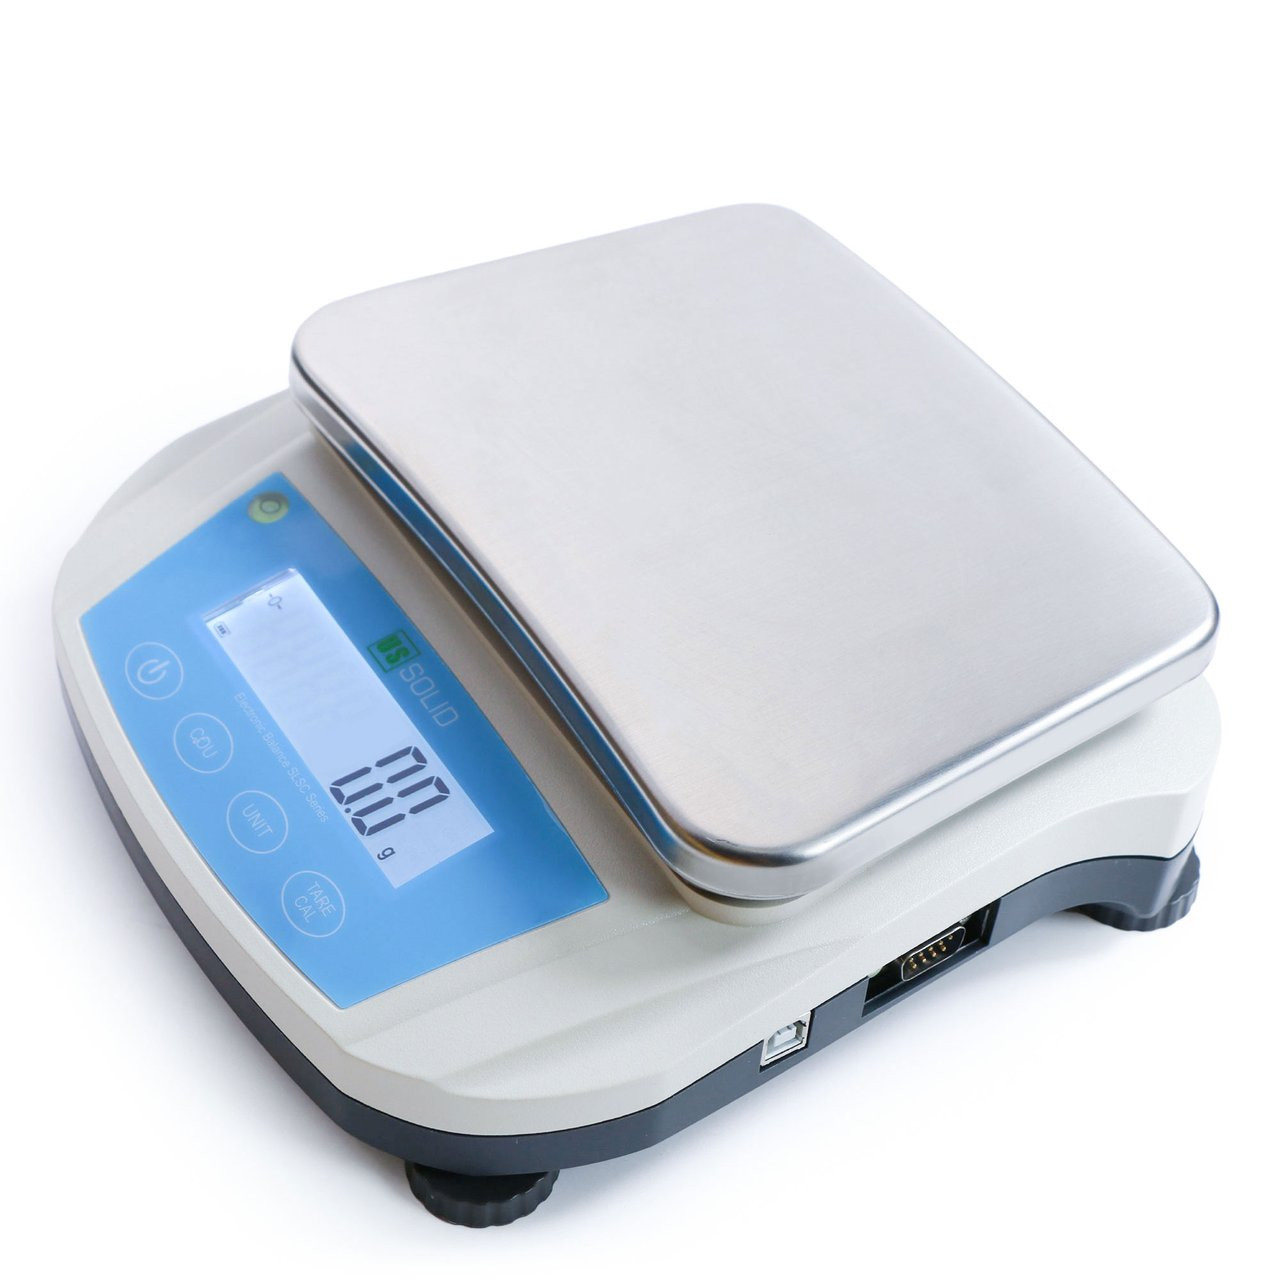 Digital Scale 500g x 0.01g for Precision Weighing & Counting - USB